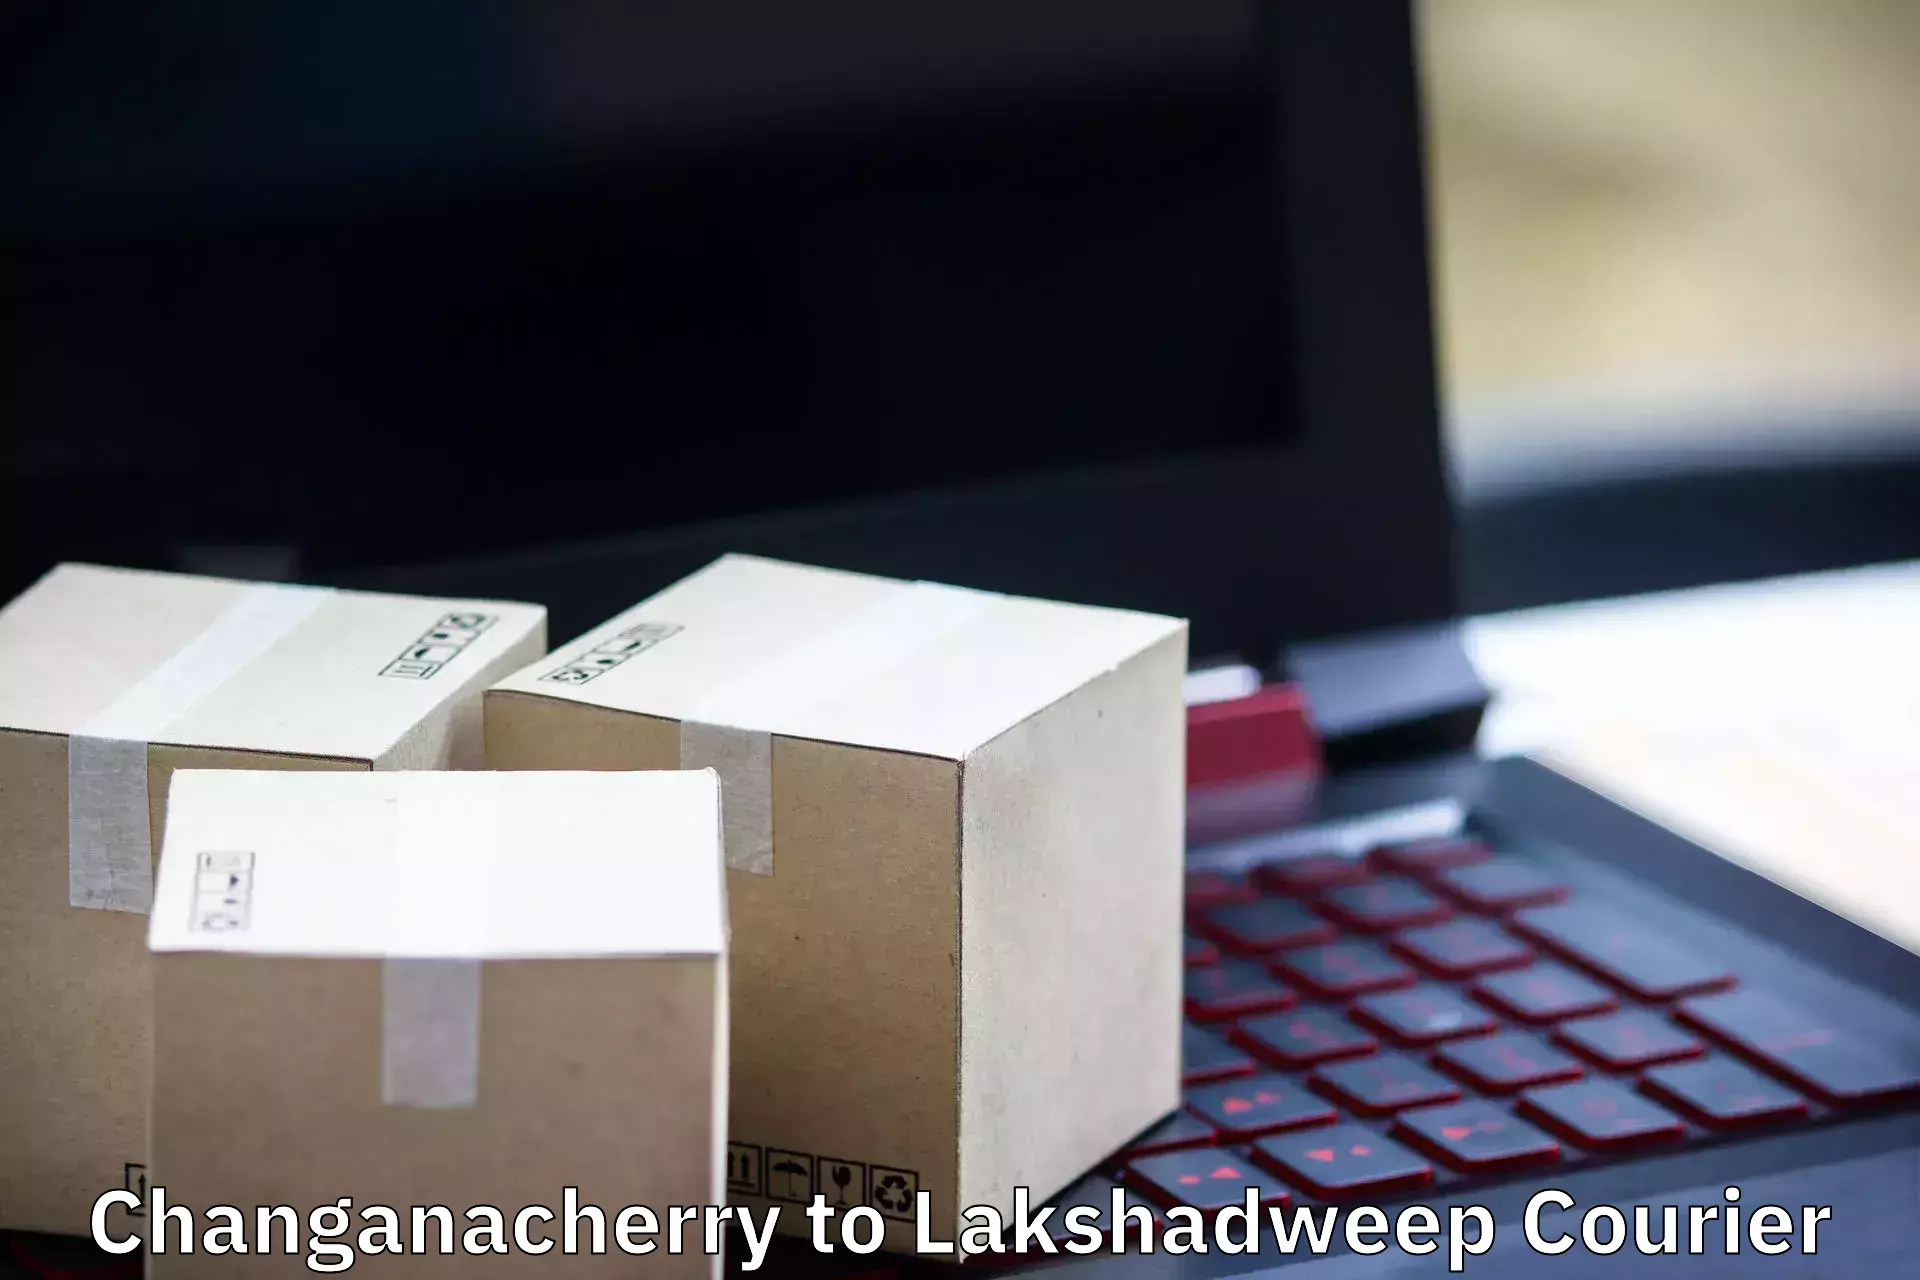 Furniture delivery service Changanacherry to Lakshadweep